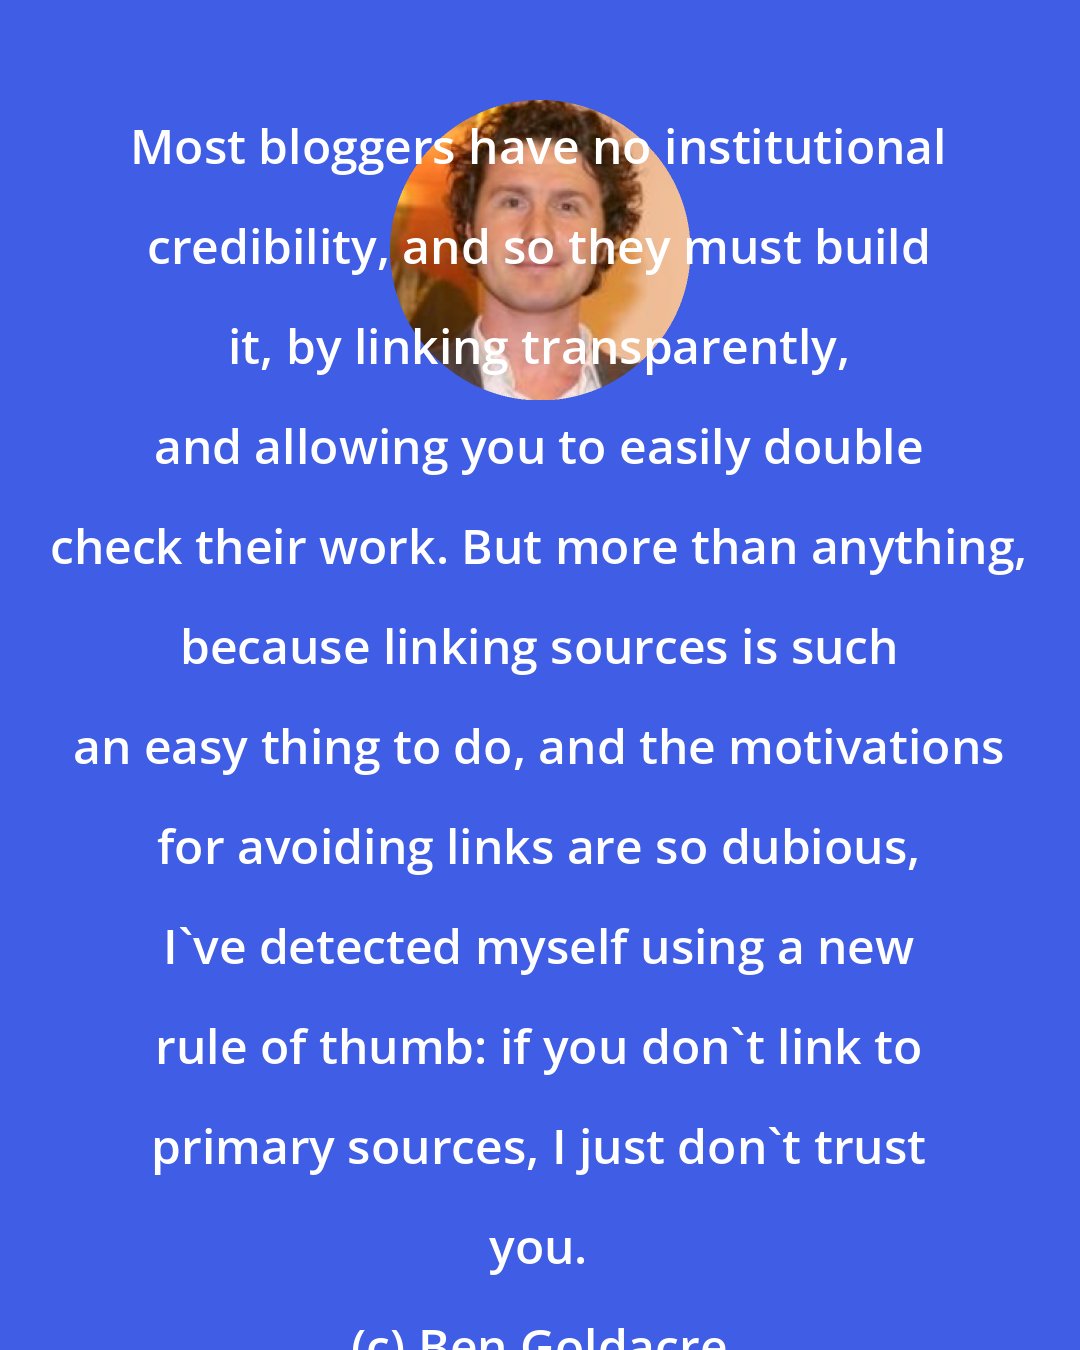 Ben Goldacre: Most bloggers have no institutional credibility, and so they must build it, by linking transparently, and allowing you to easily double check their work. But more than anything, because linking sources is such an easy thing to do, and the motivations for avoiding links are so dubious, I've detected myself using a new rule of thumb: if you don't link to primary sources, I just don't trust you.